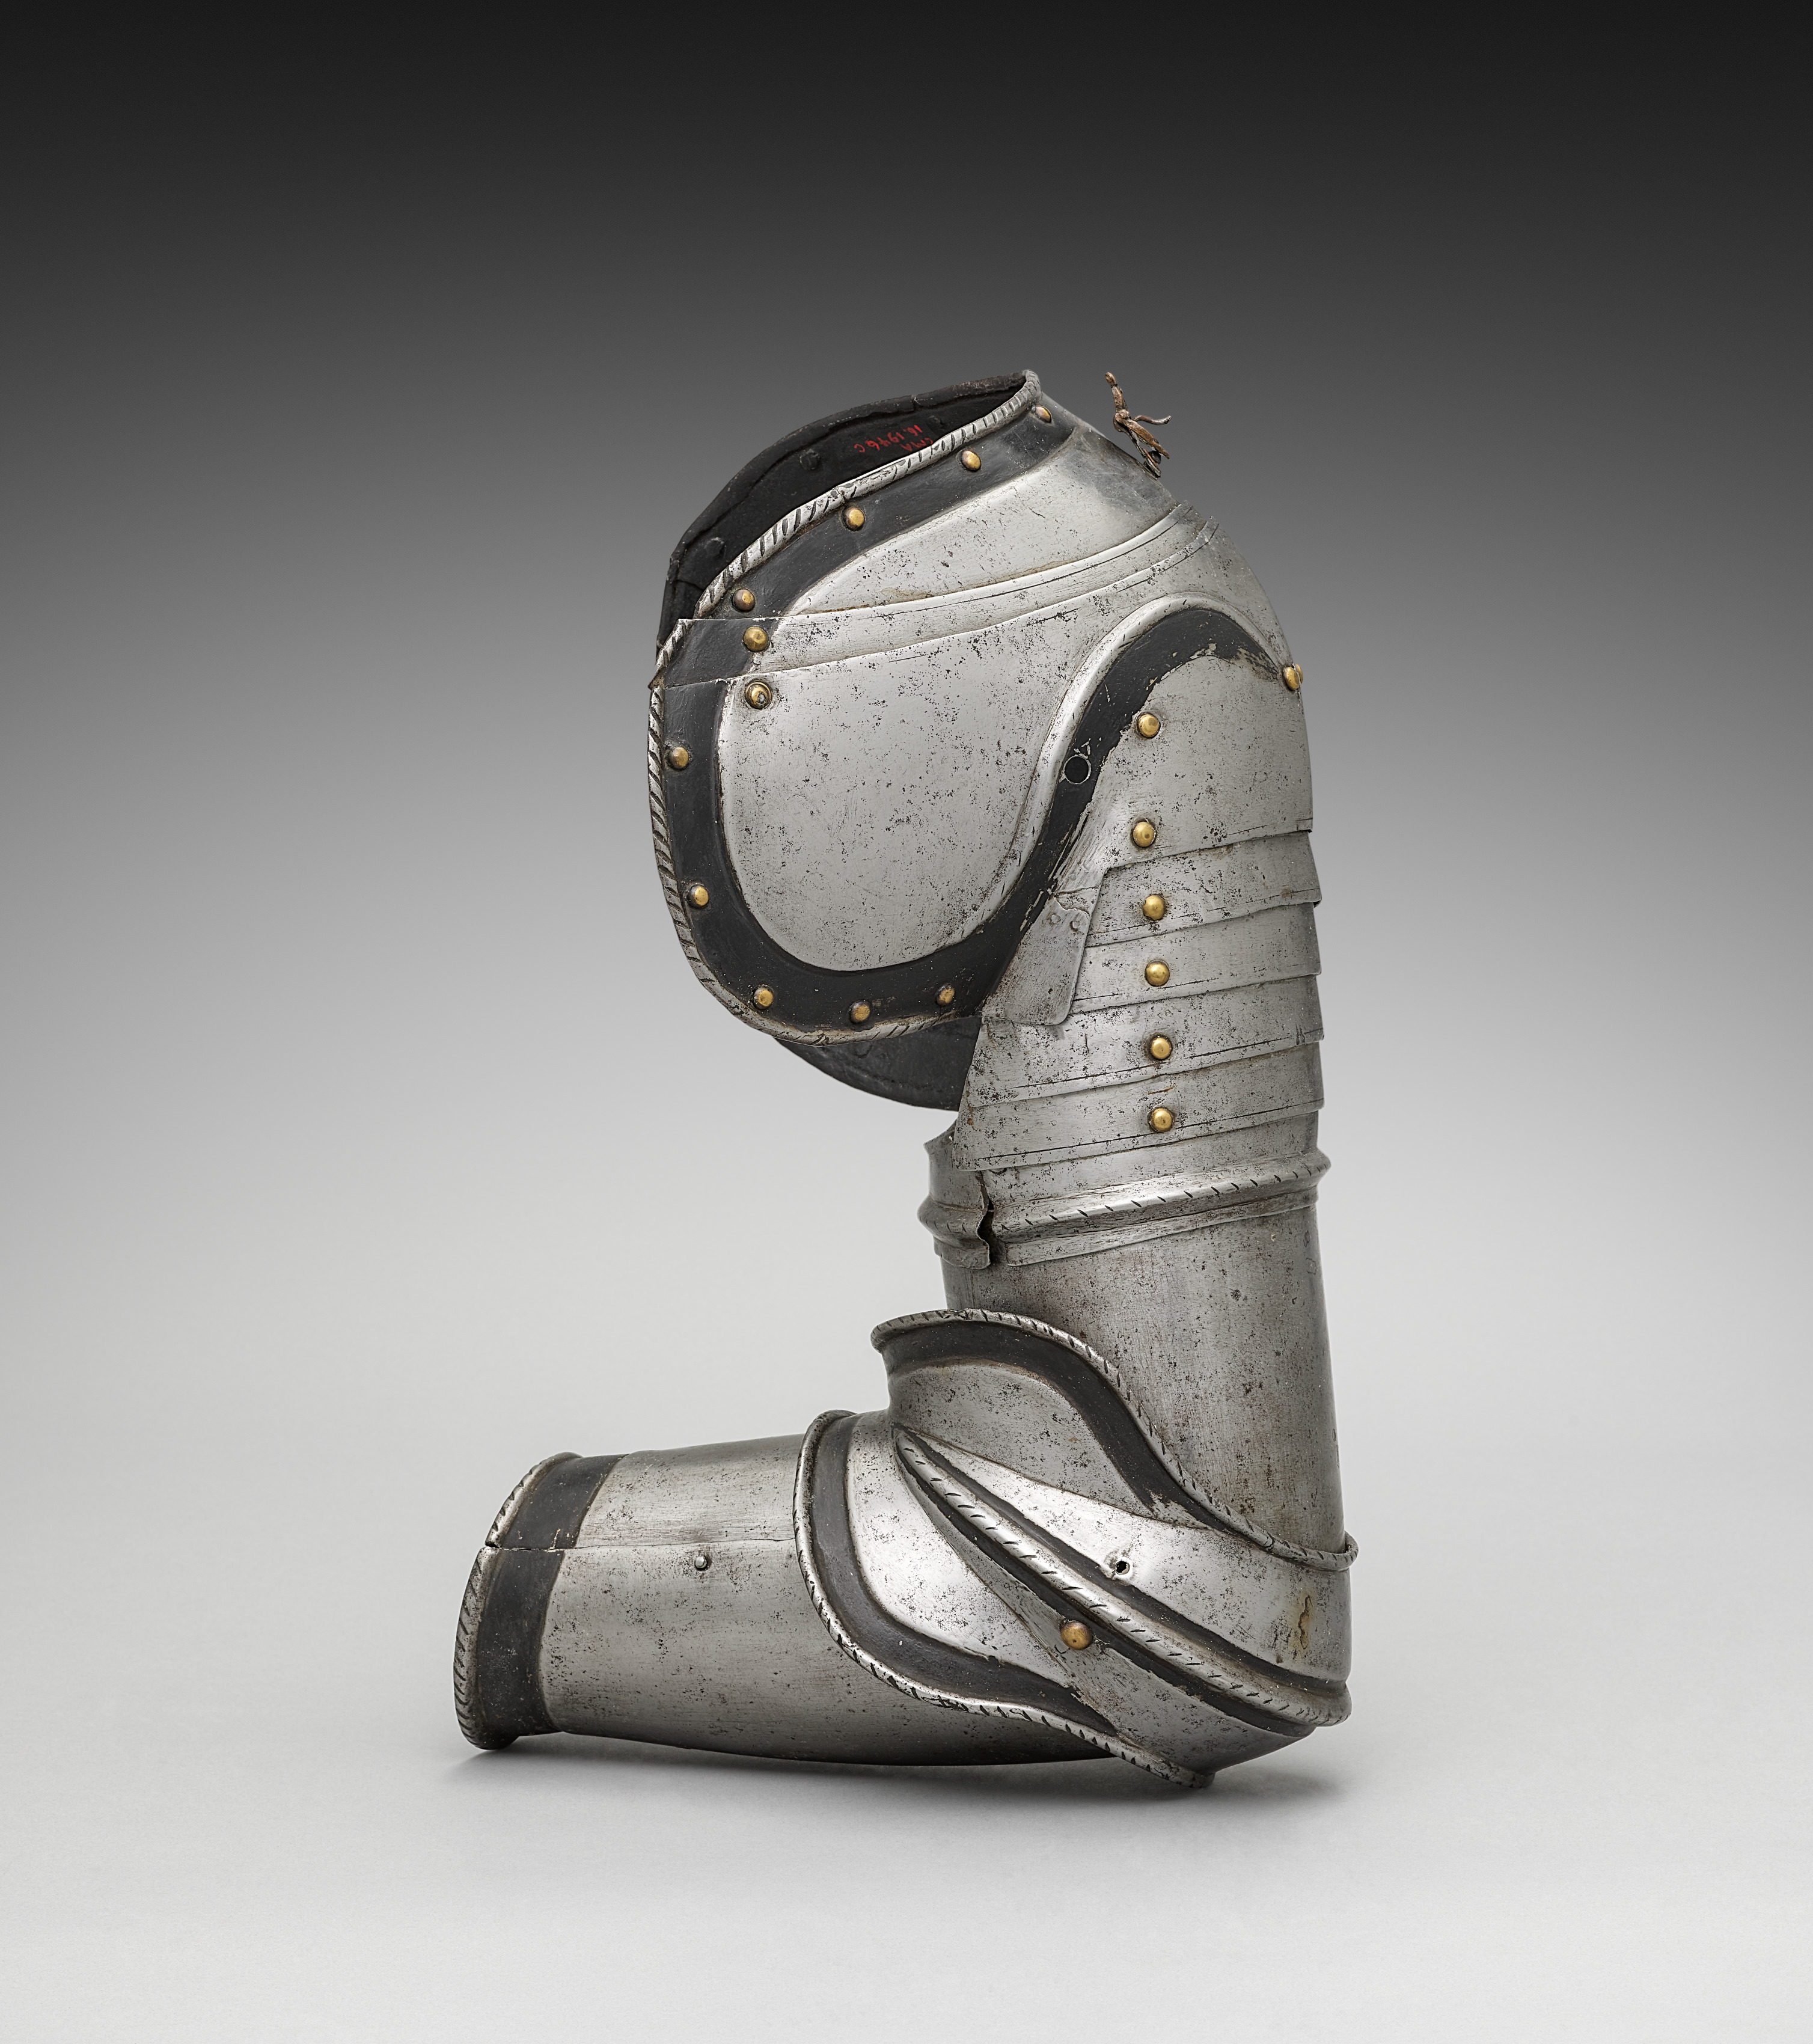 Left Pauldron with Rerebrace (upper cannon) and Lower Cannon